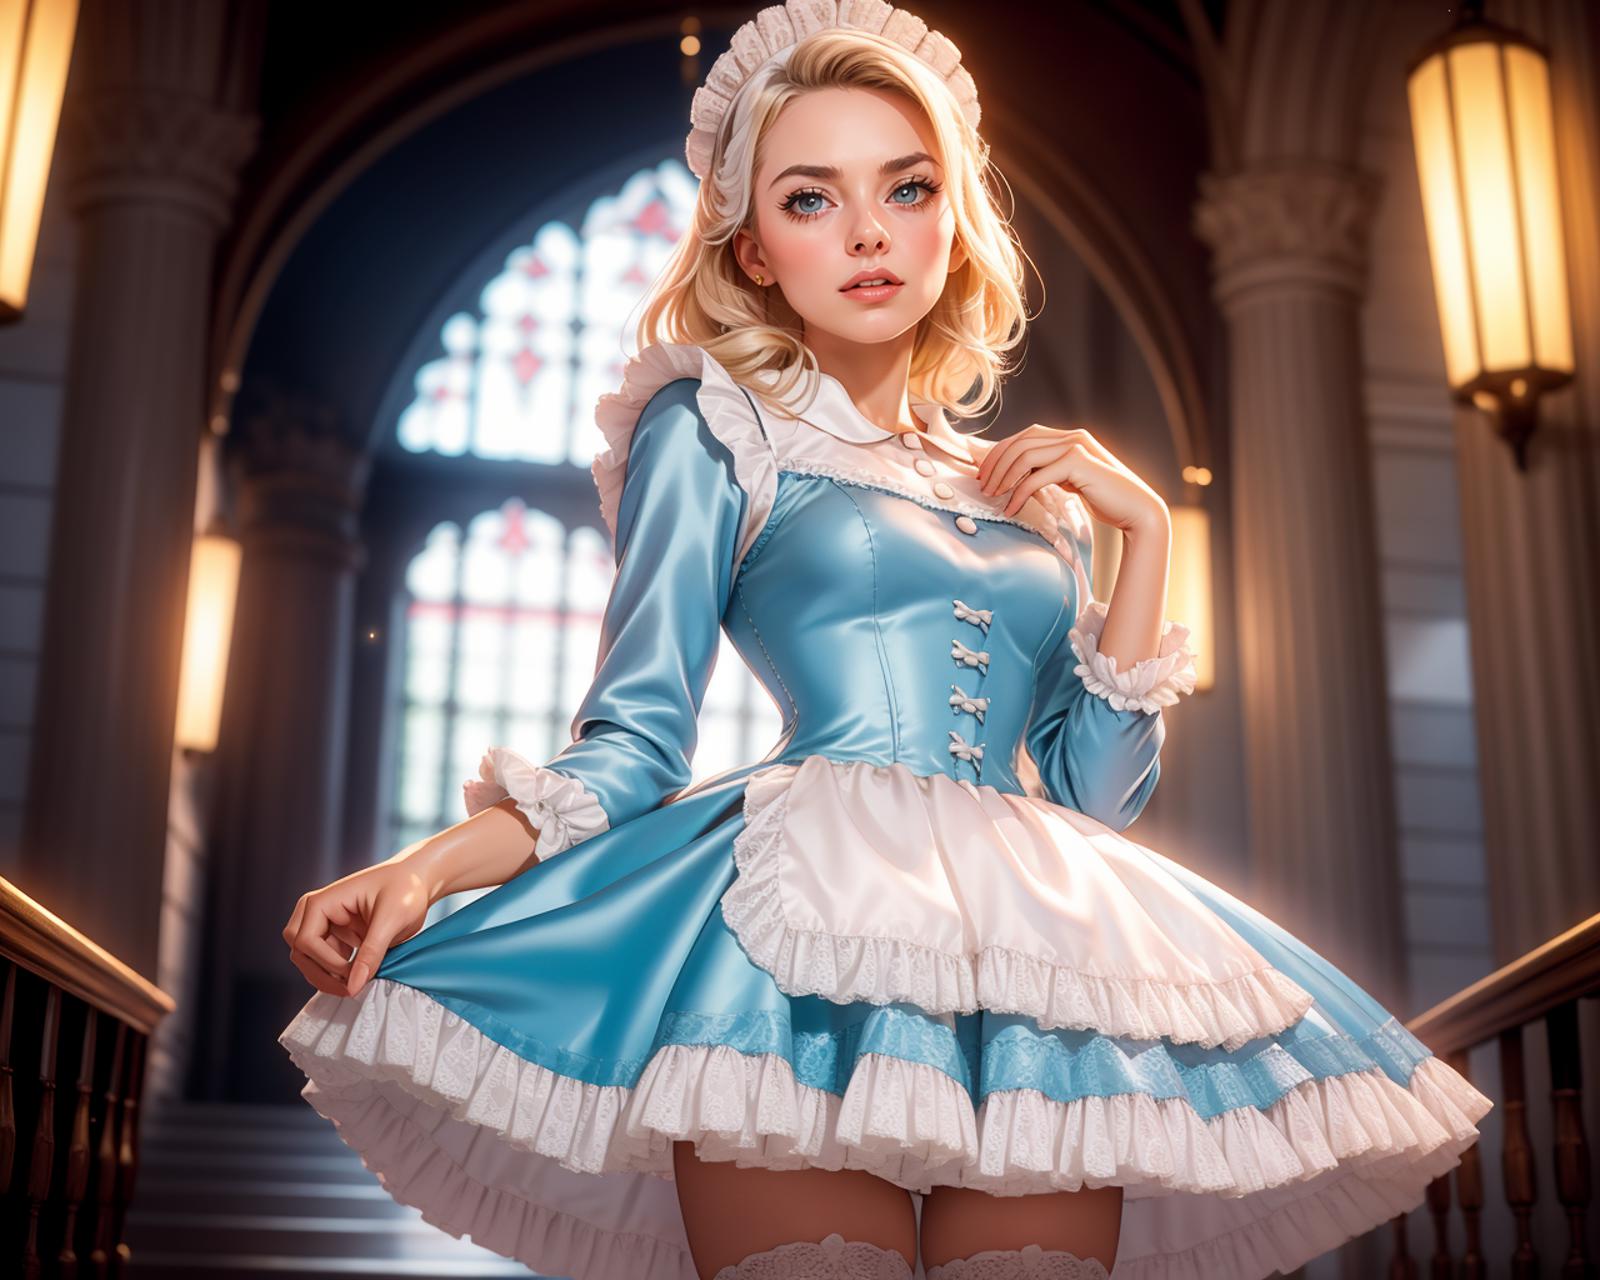 Pastel French Maid Outfit image by Sophorium